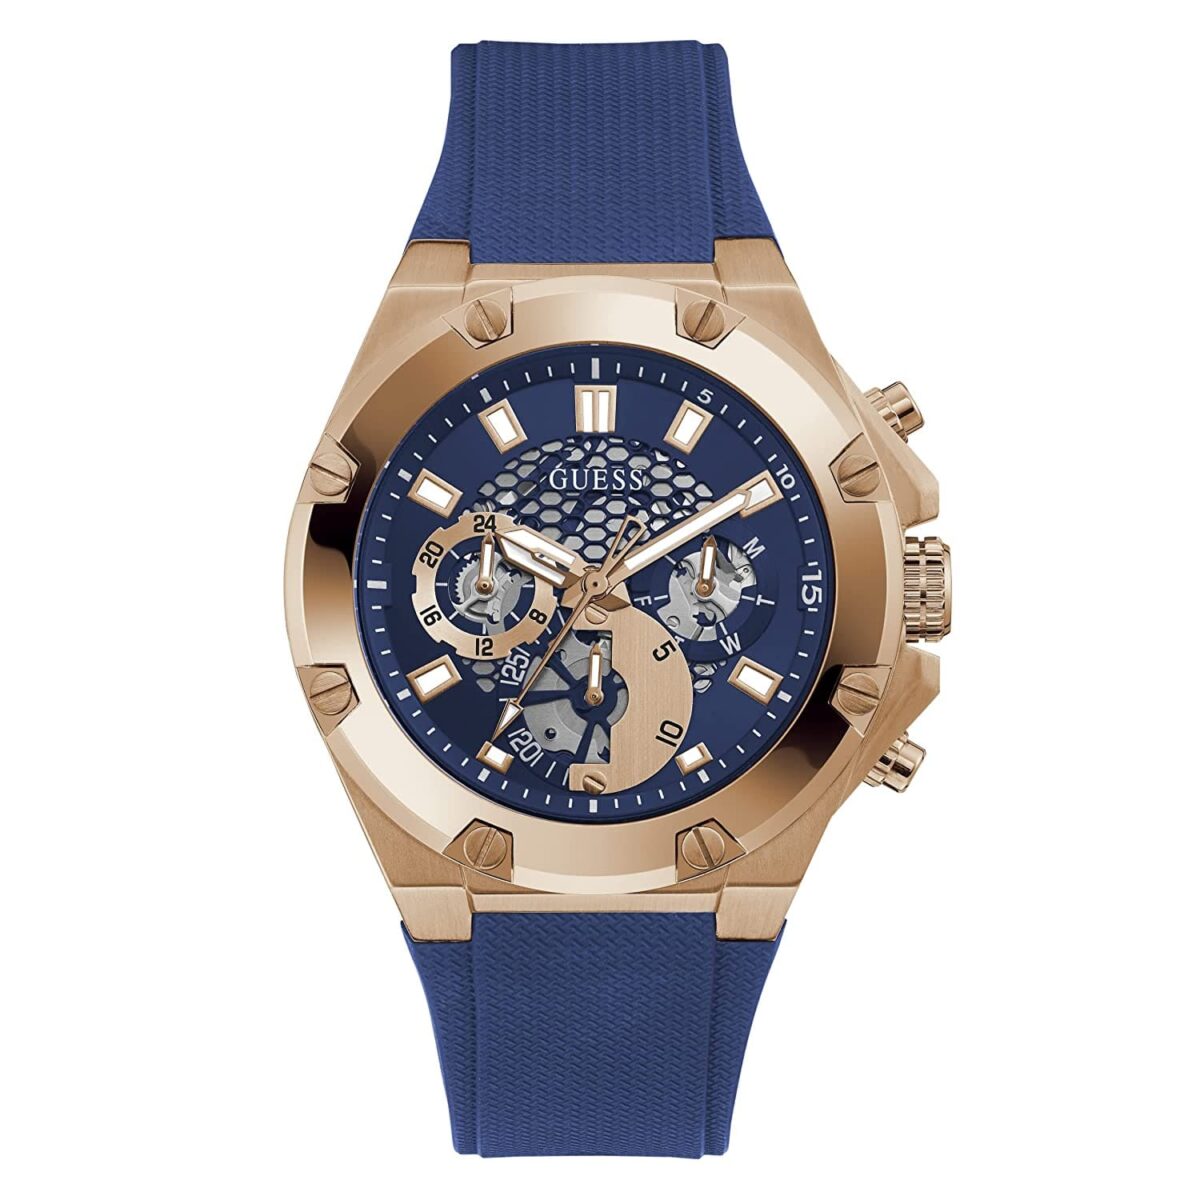 Original-Guess-Watch-GC-GW0334G3-In-Egypt-Silicone-strap-Blue-Color-Metal-Belt-blue-Dial-Analog-Machine